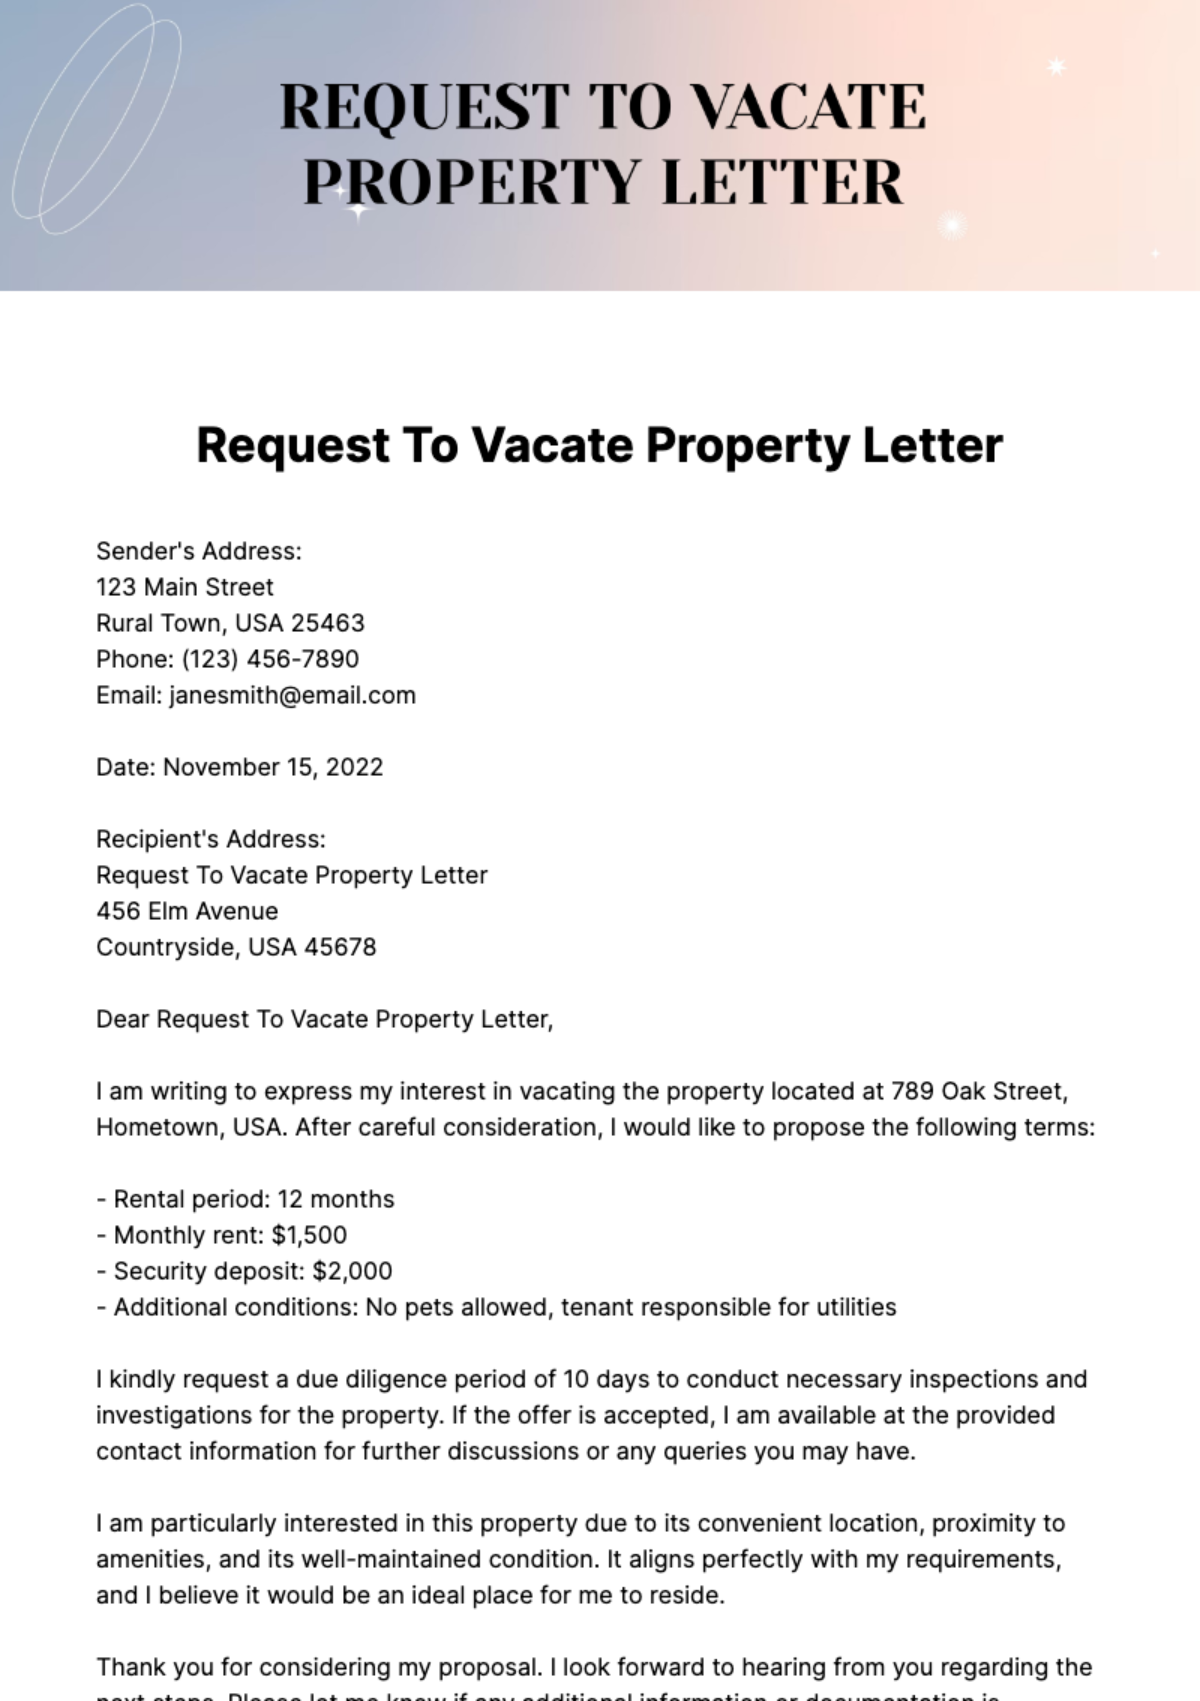 Request To Vacate Property Letter Template